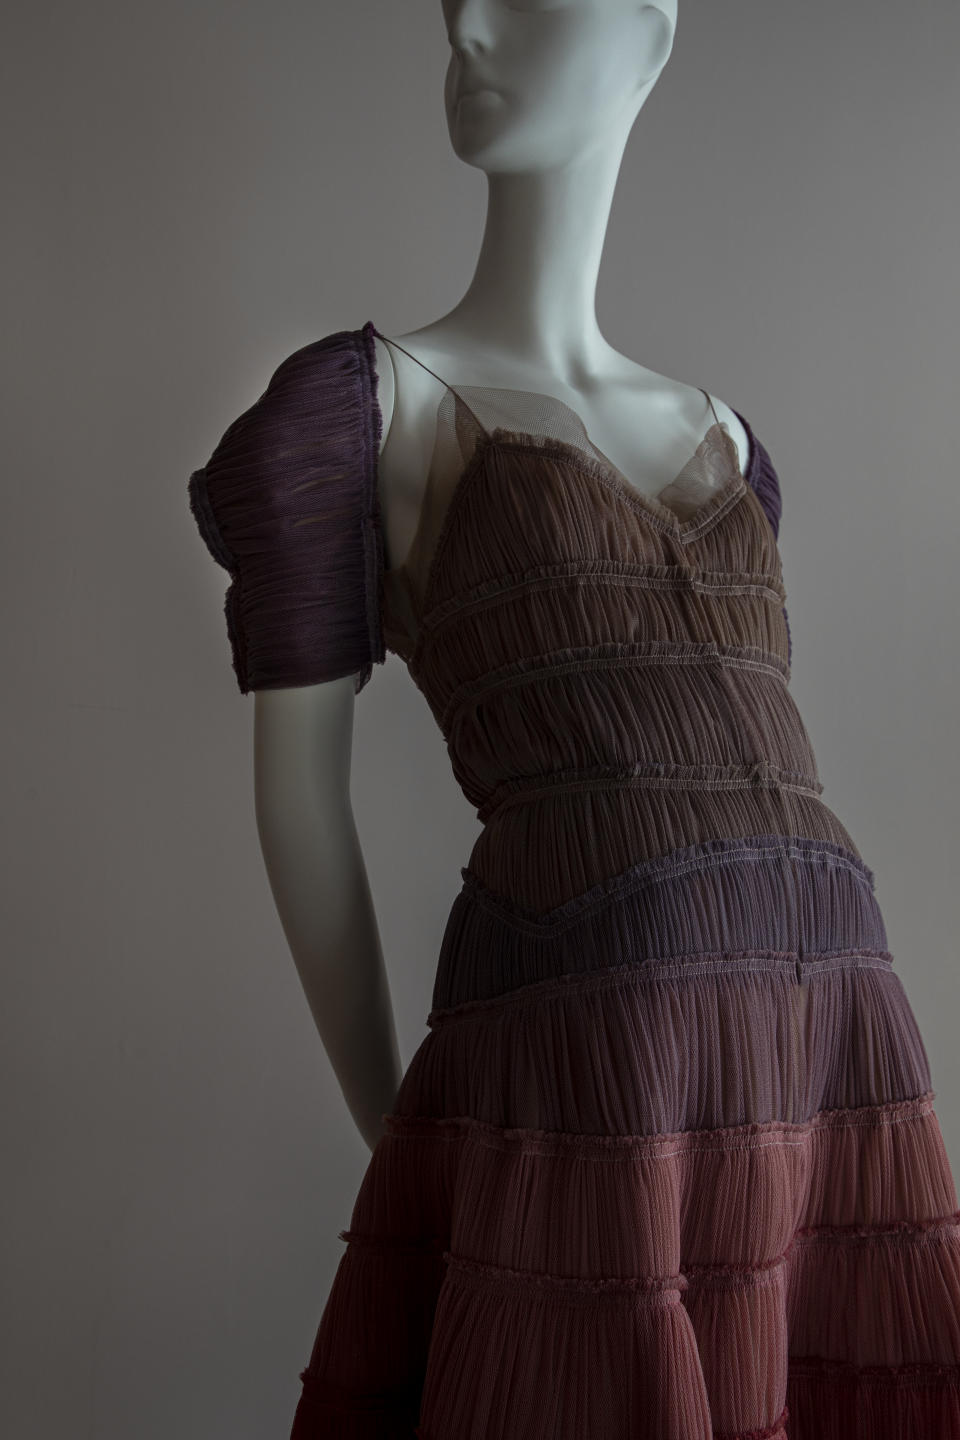 A dress by Isabel Toledo on show at the SCAD FASH museum in Lacoste, France. - Credit: Chia Chong/Courtesy of SCAD